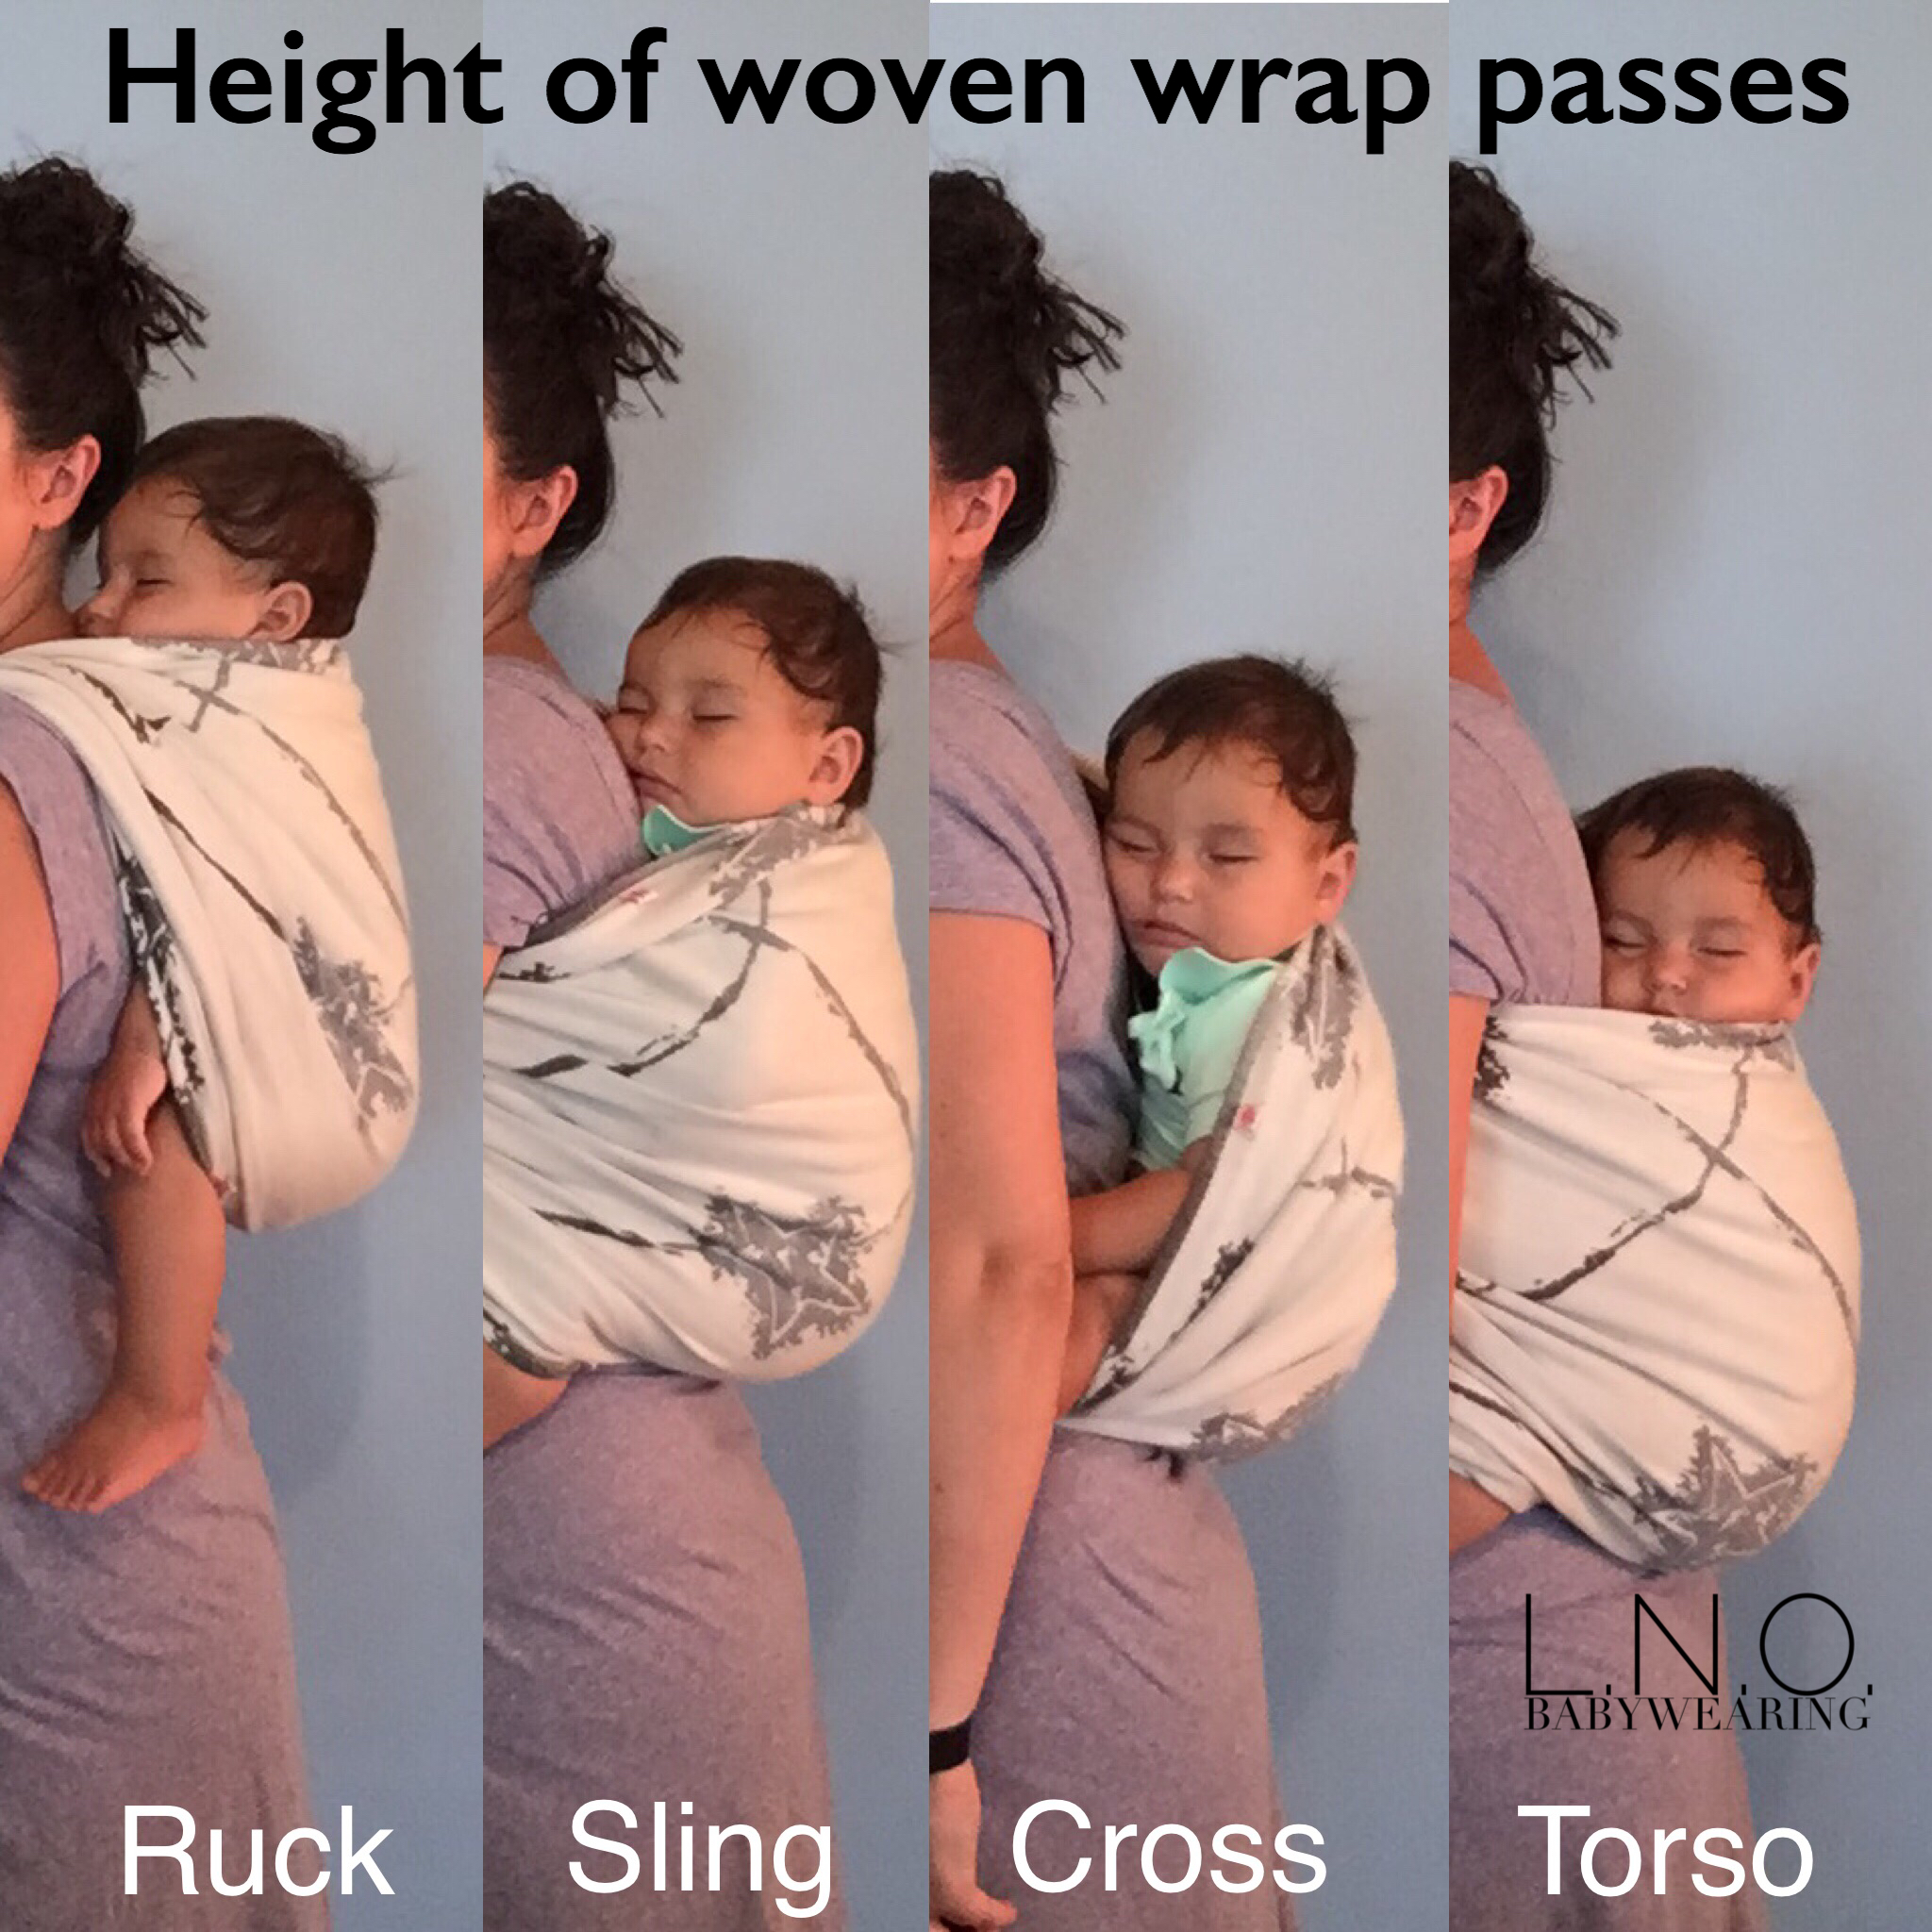 Woven wrap passes and how they affect 